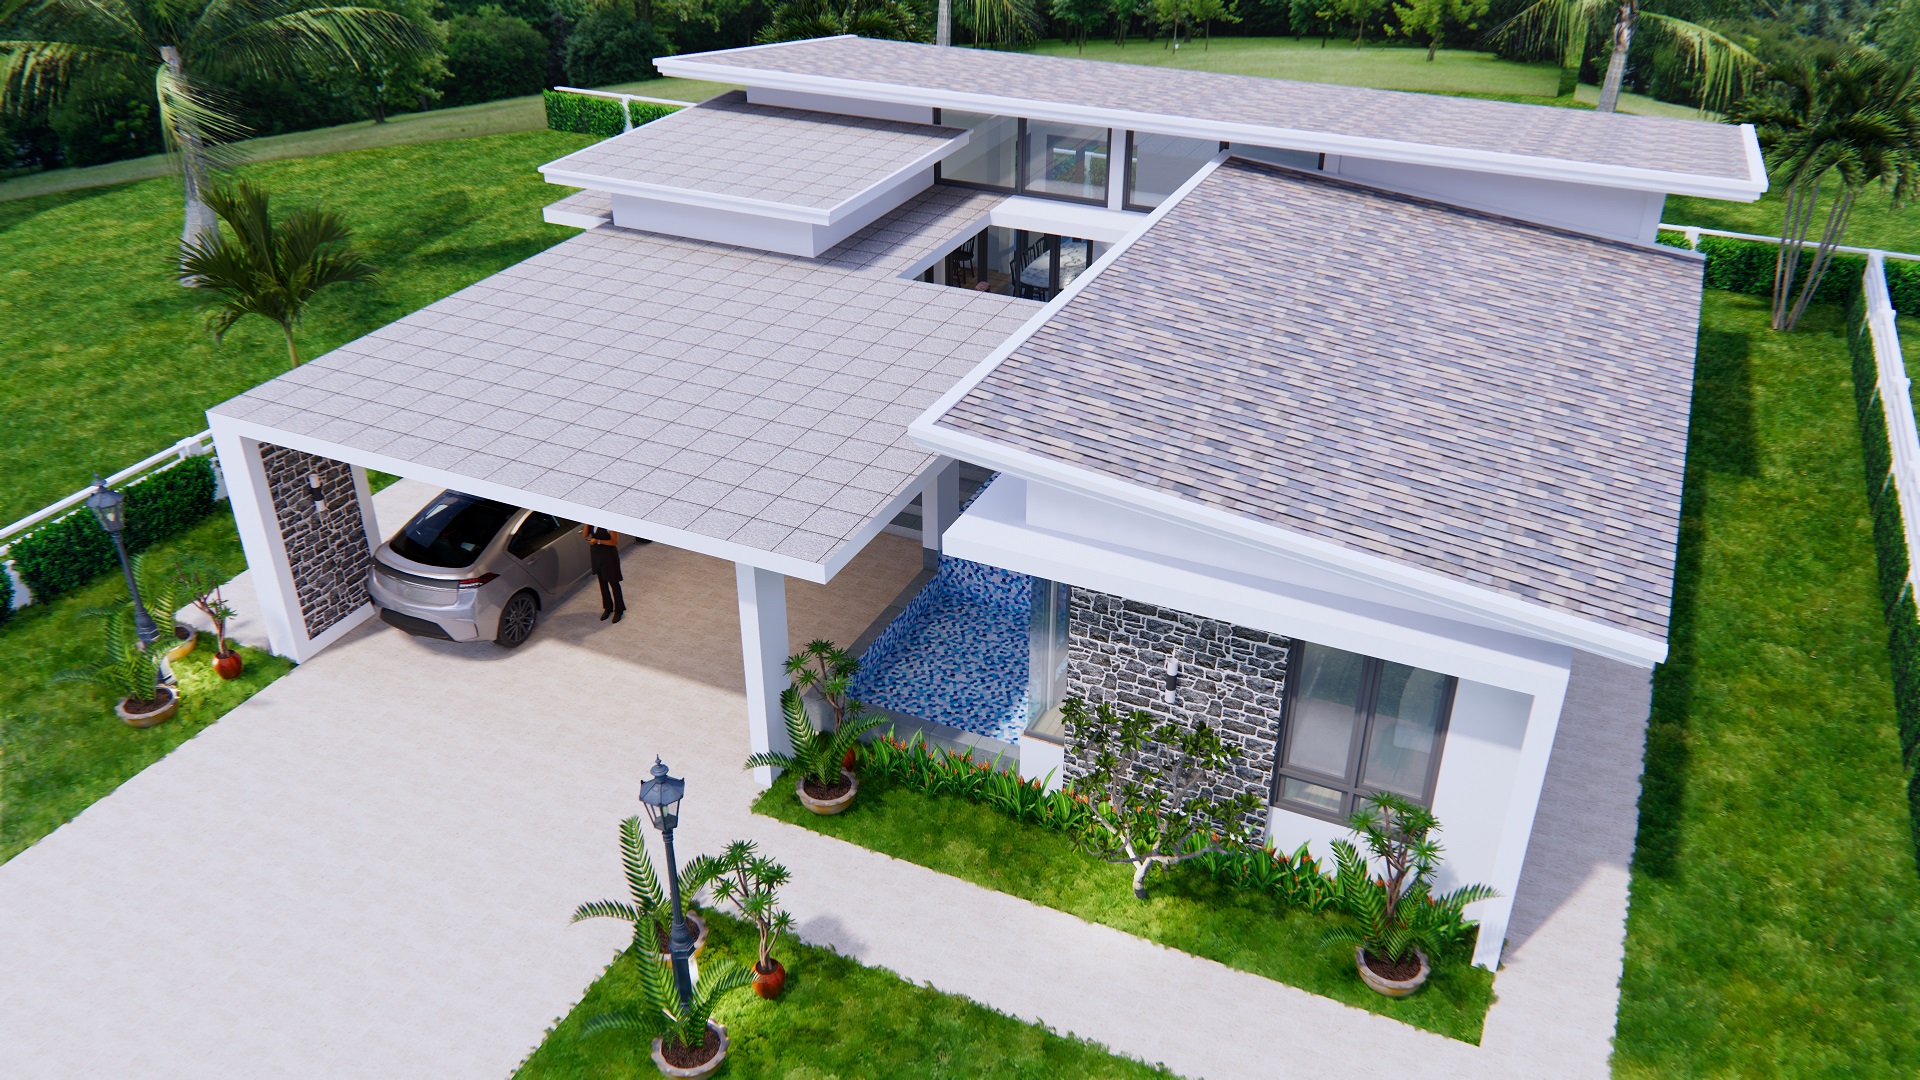 House Design with Pool 14x14 Meter 46x46 Feet 3 Beds 4